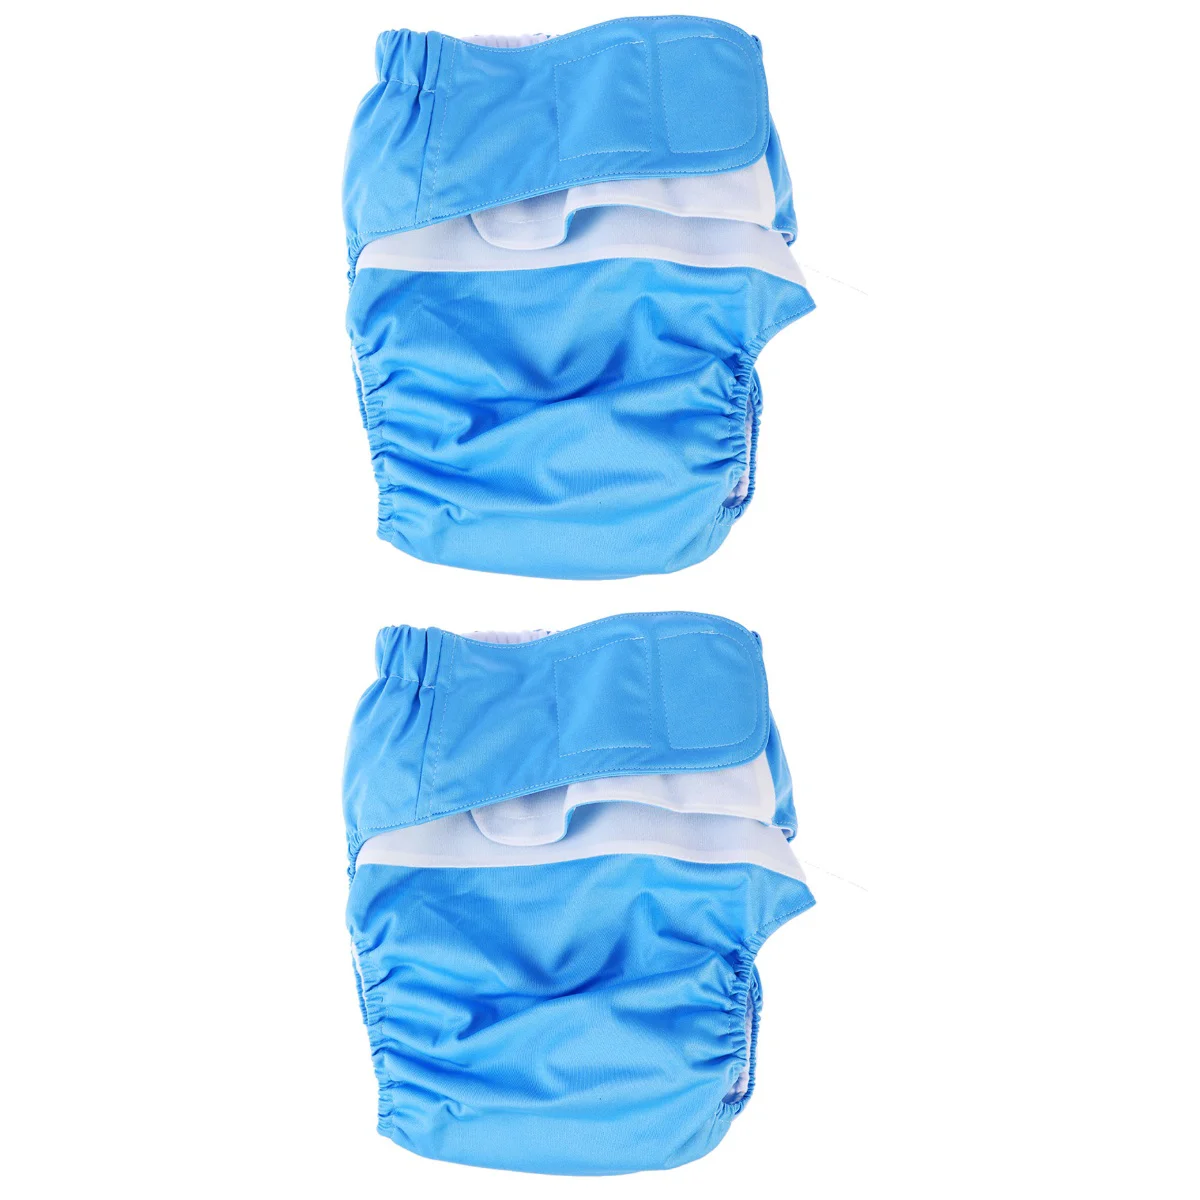 

2pcs Adult Diapers Covers Reusable Incontinence Pants Cloth Diaper Wraps Washable Overnight Leakfree Underwear Protection Bed